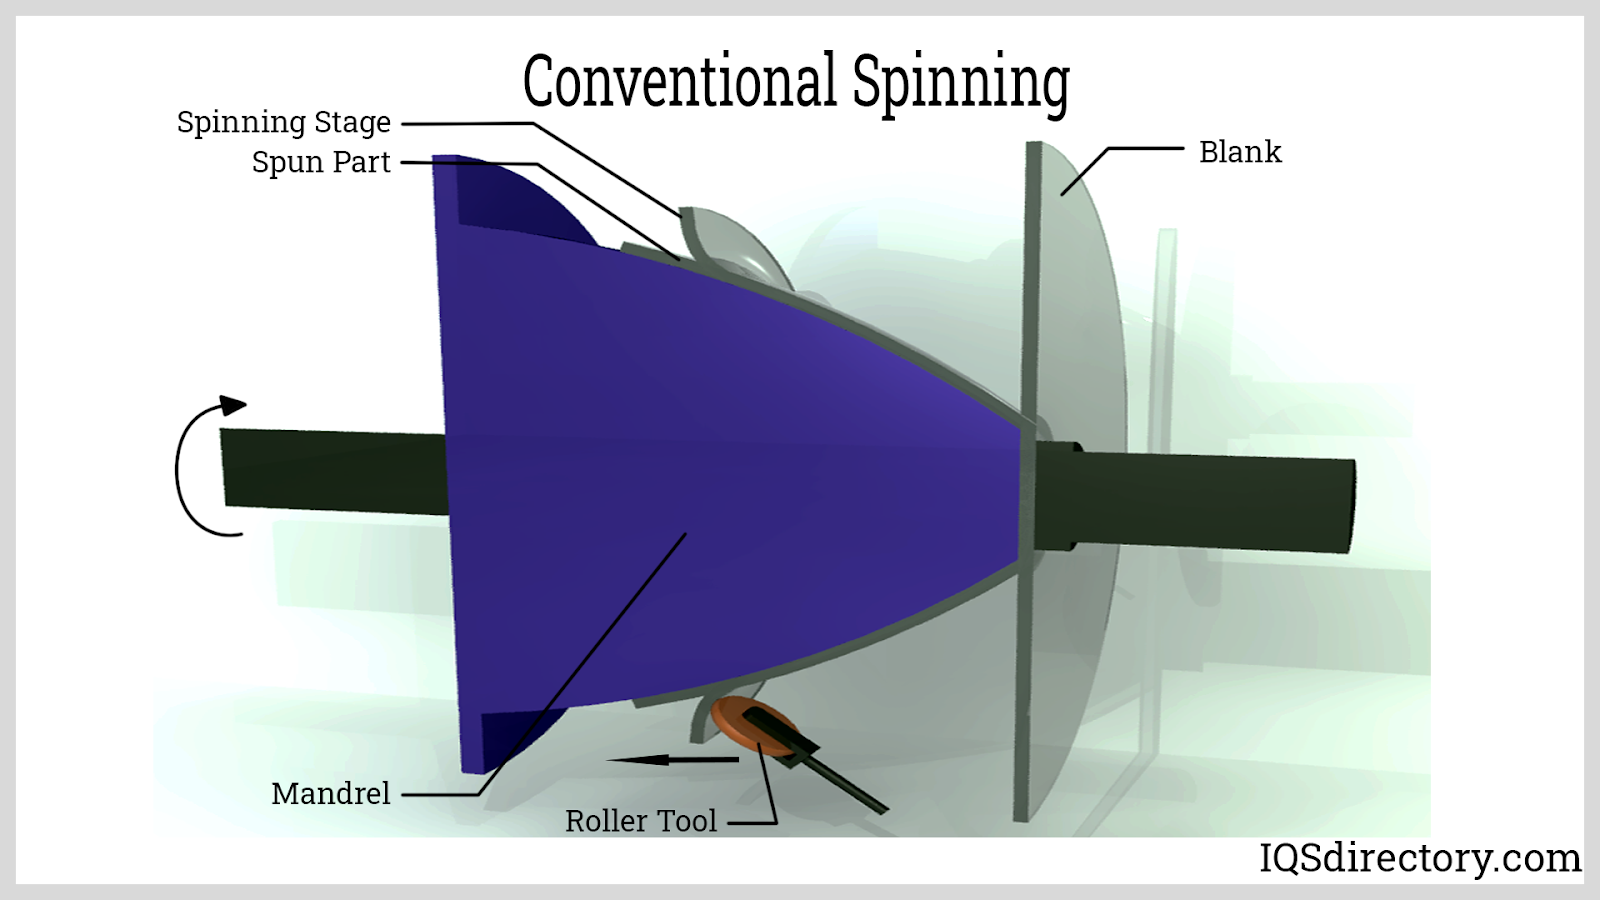 
Conventional Spinning